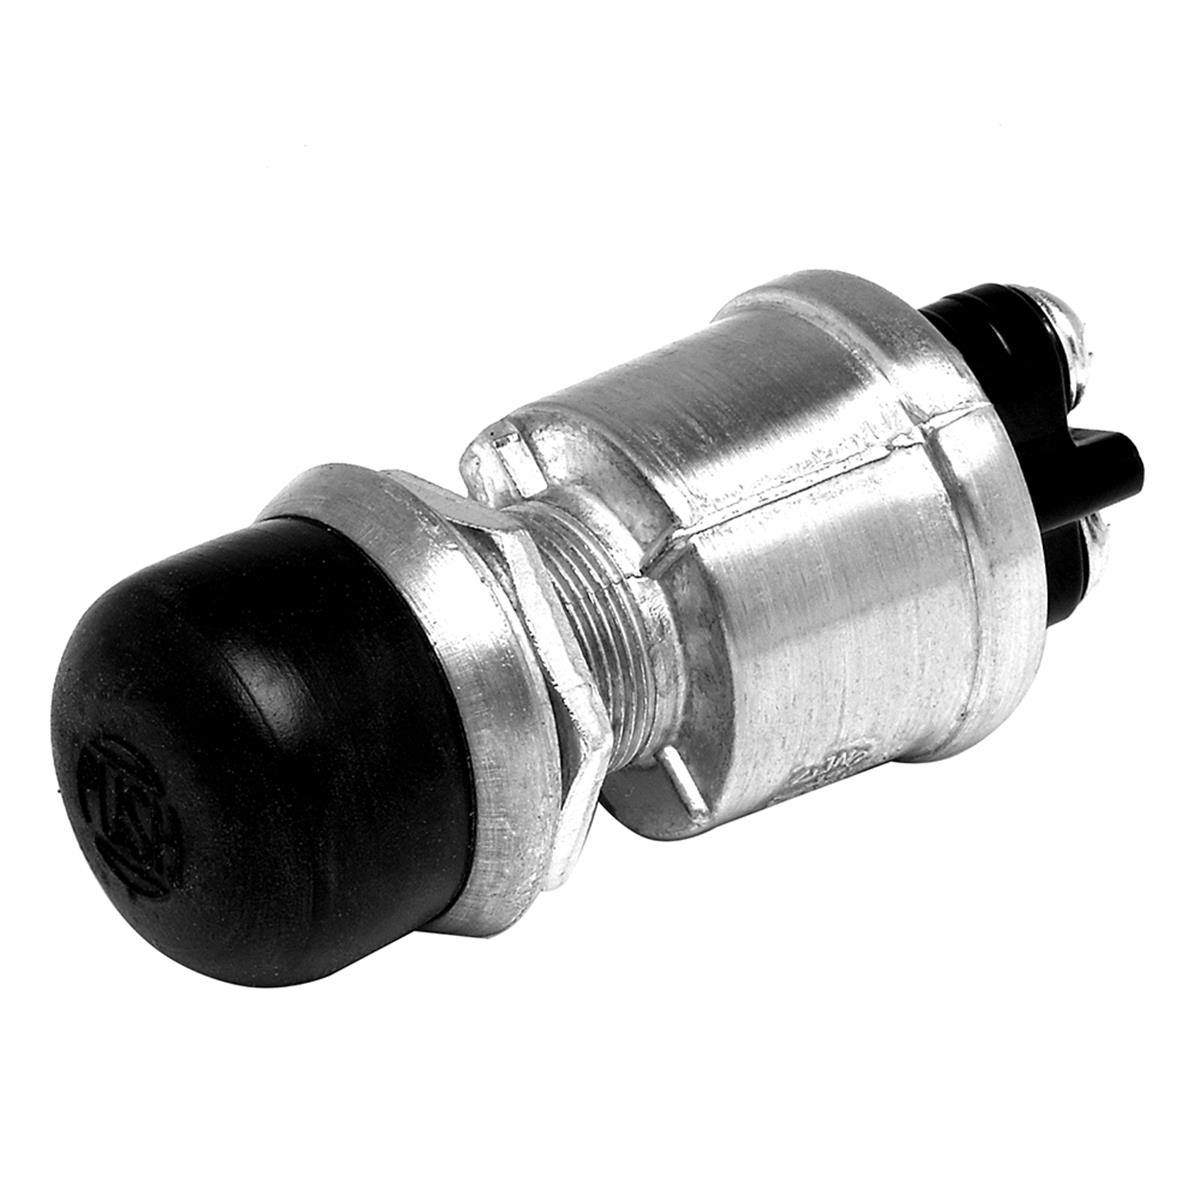 Off-on Spst 2 Screw Push Button Switch With Screw-on Cap